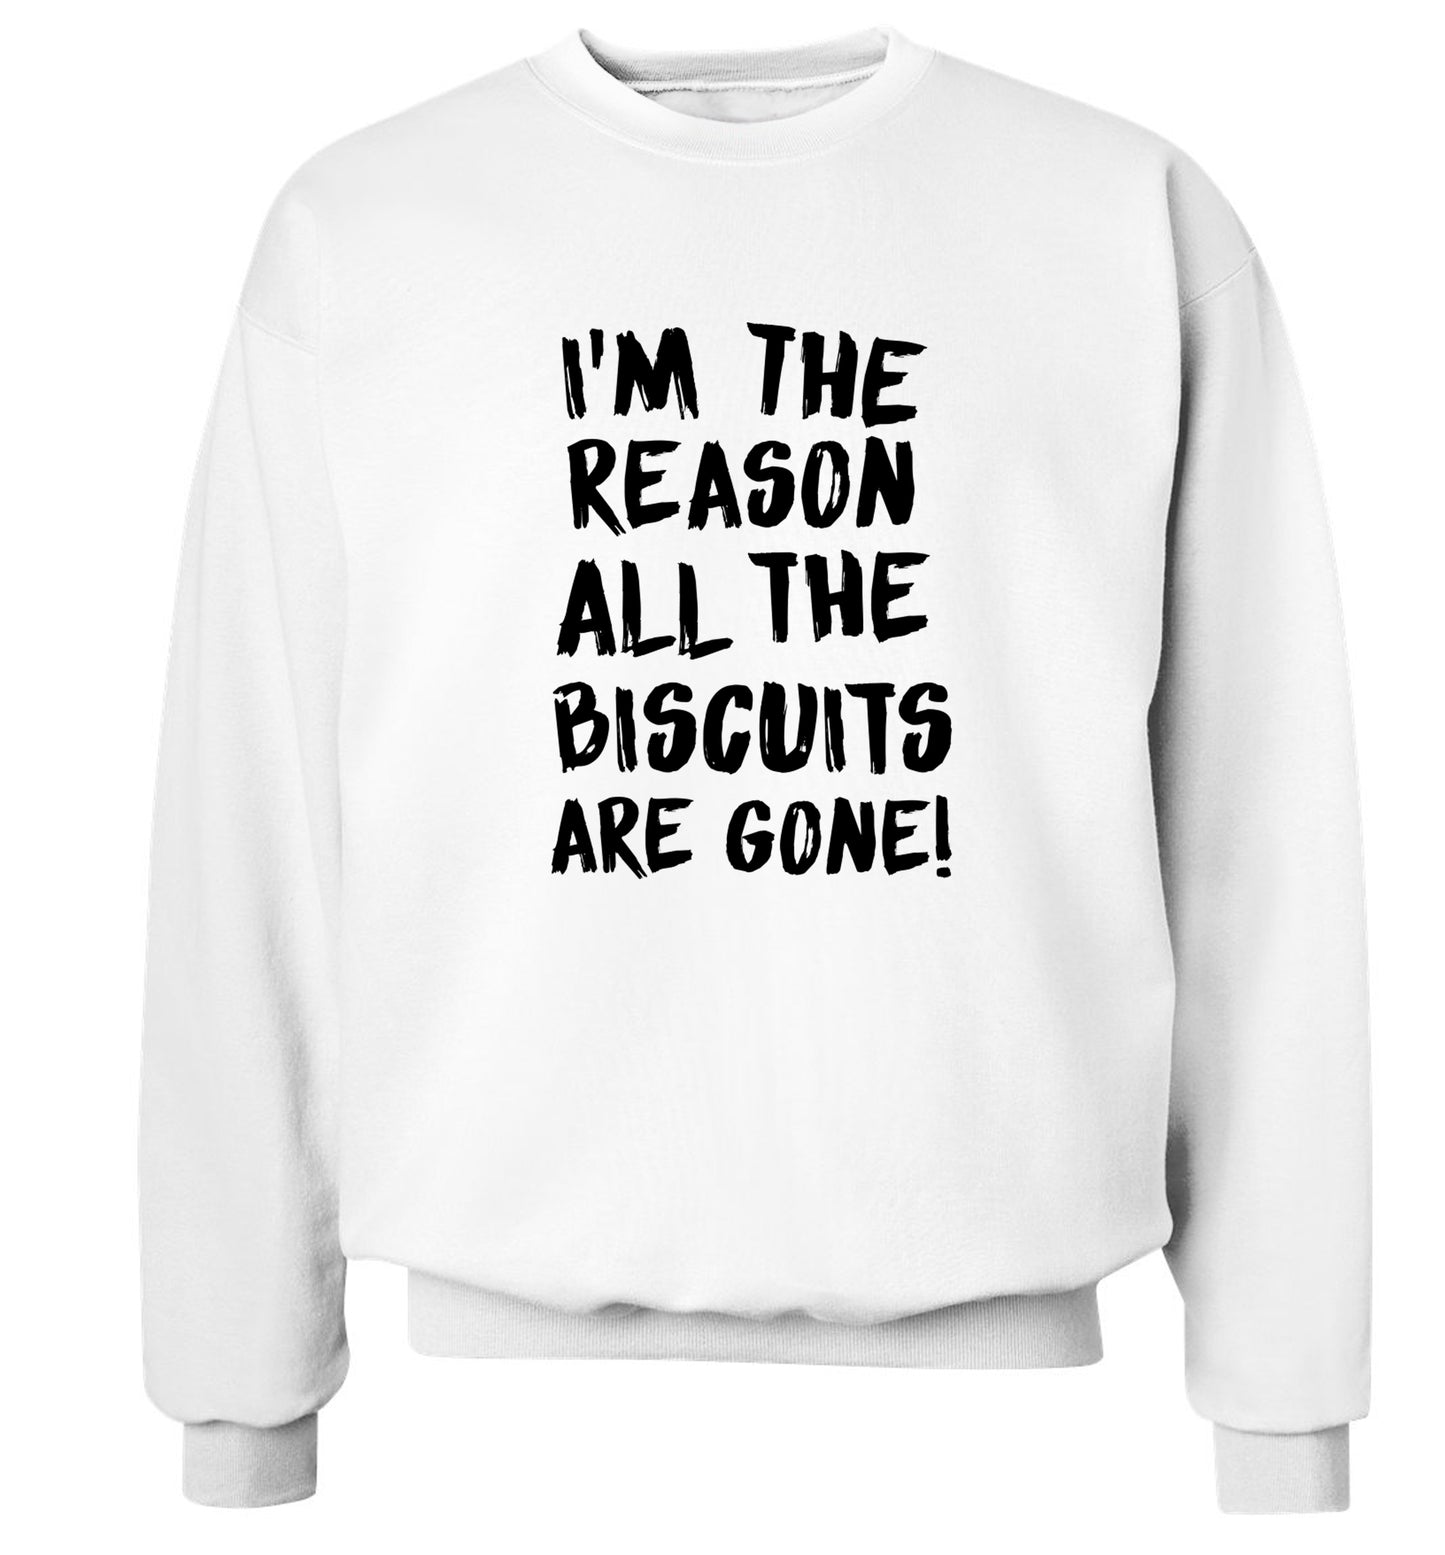 I'm the reason why all the biscuits are gone Adult's unisex white Sweater 2XL